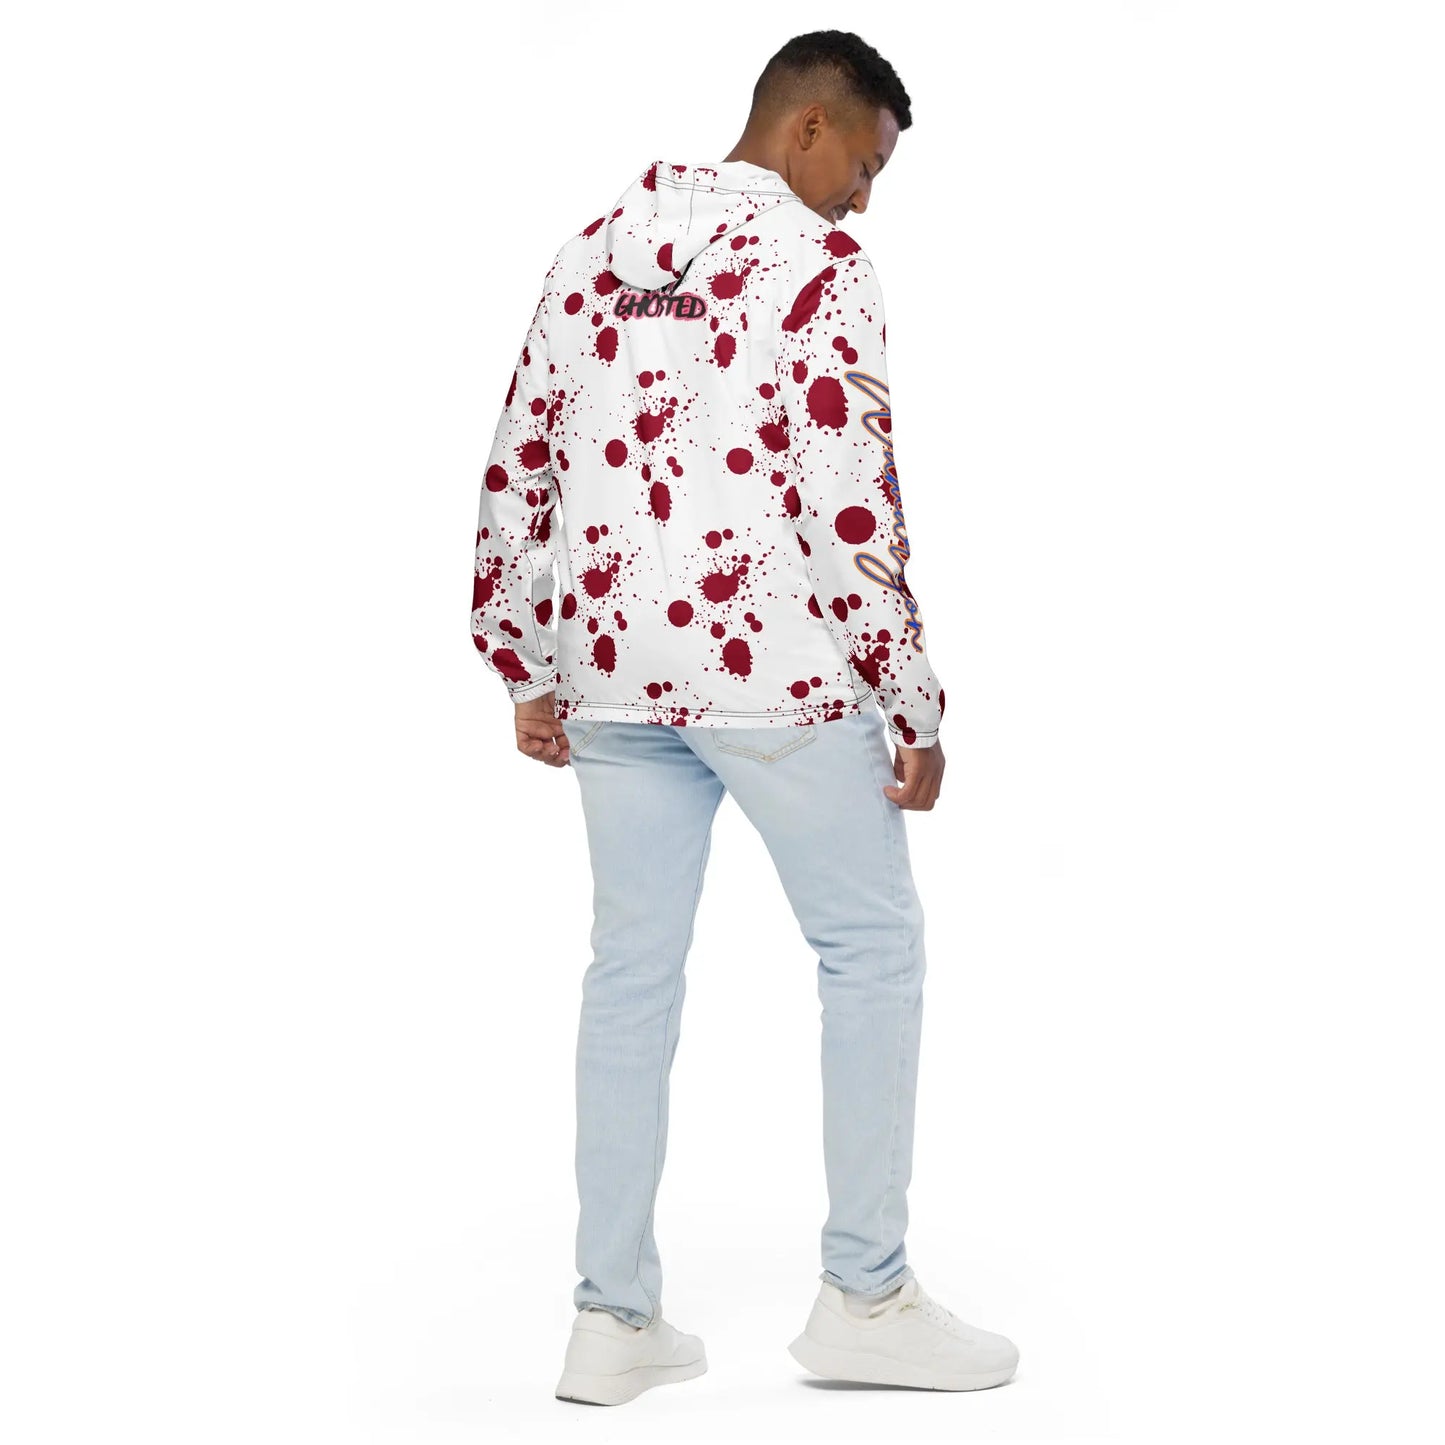 Wamarzon's Ghosted Men’s windbreaker - Image #5